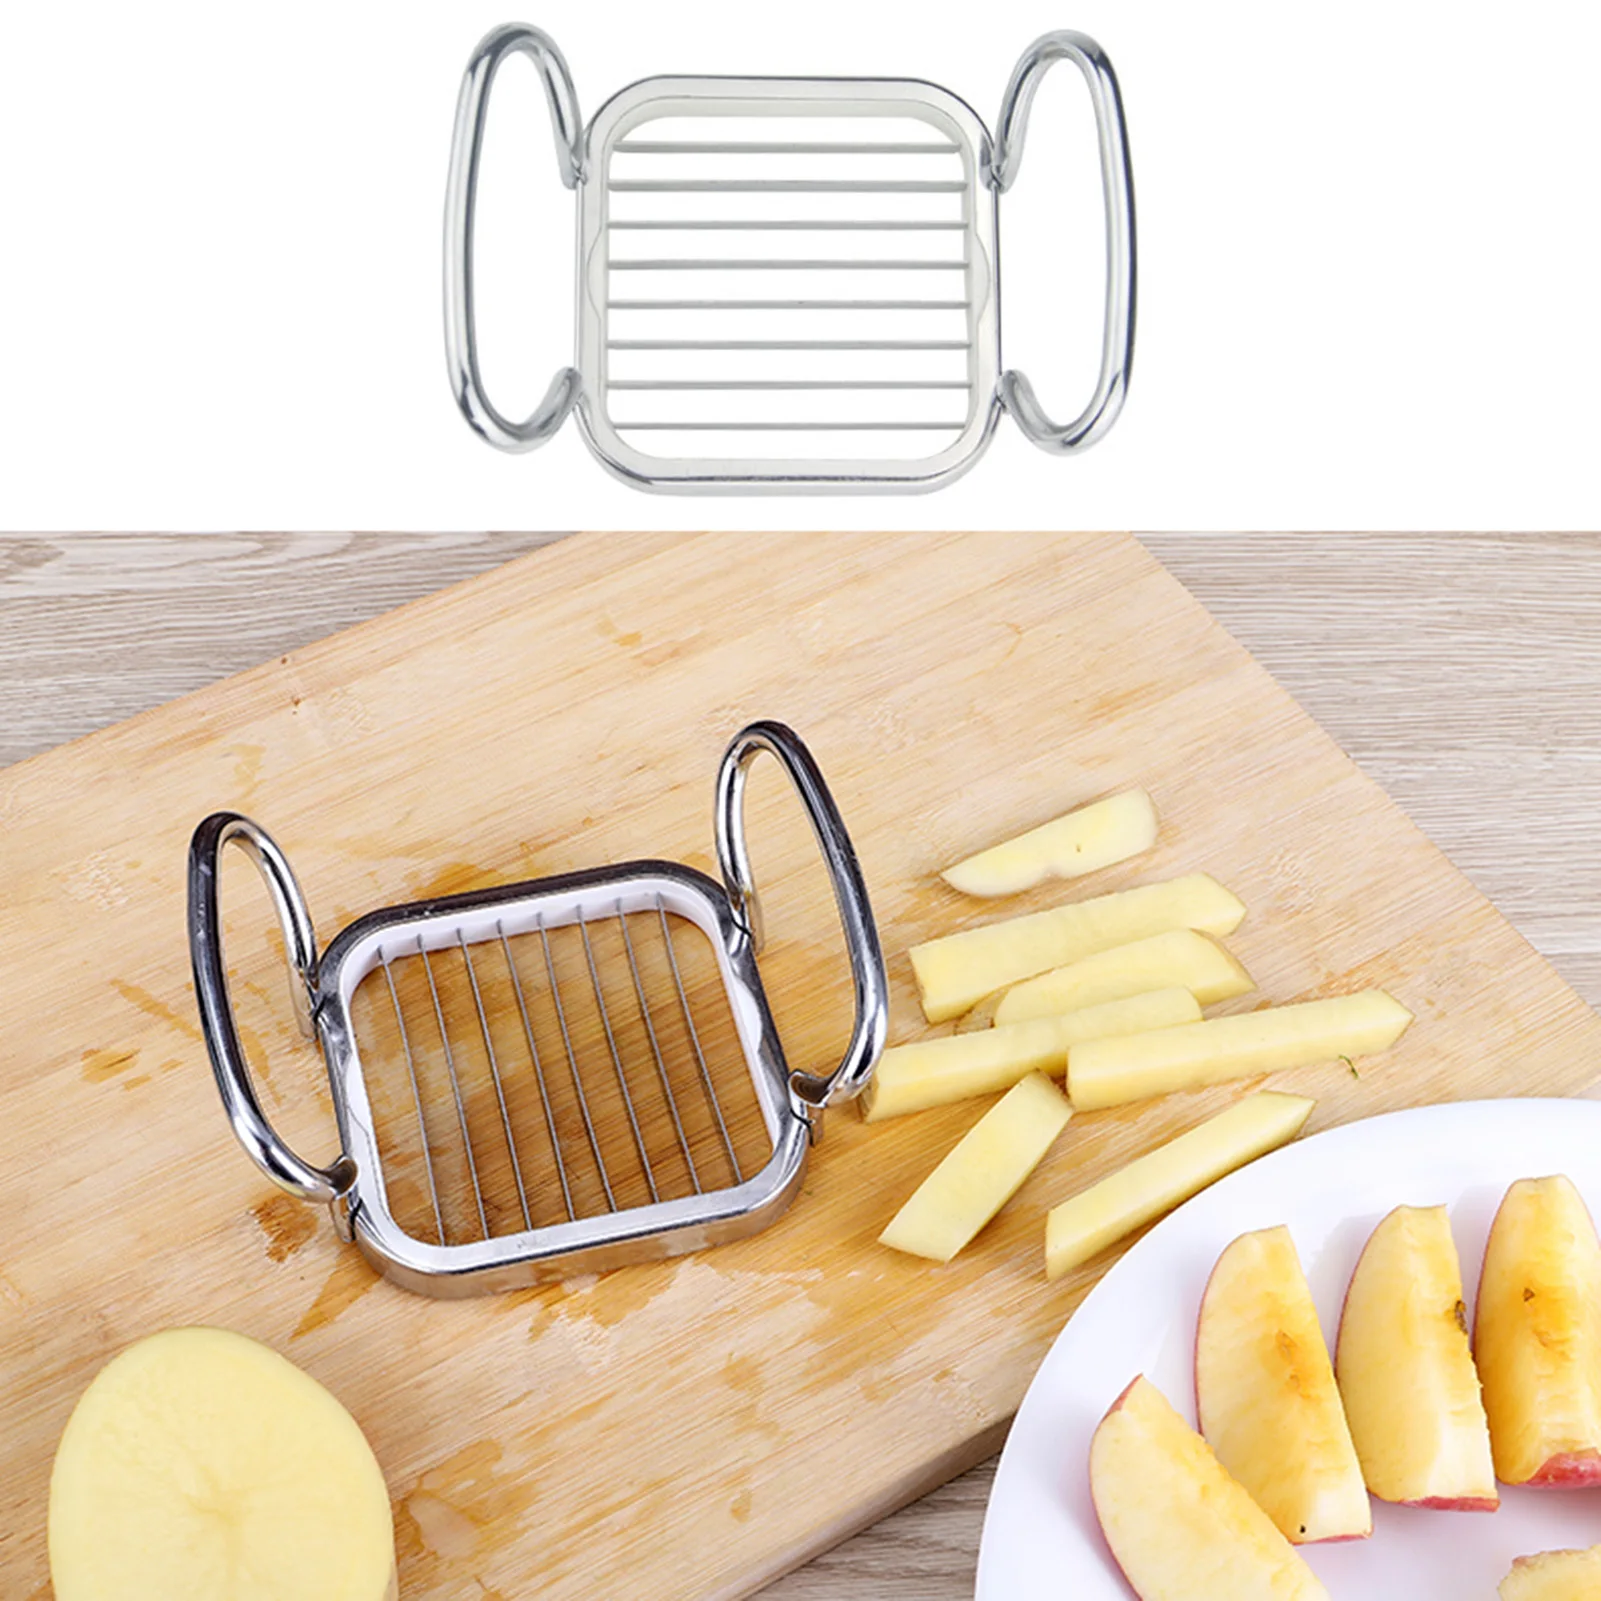 

5 Pcs Stainless Steel Apples Cutter Fruit Pear Divider Slicer Cutting Corer Cooking Vegetable Tools Chopper Kitchen Gadgets